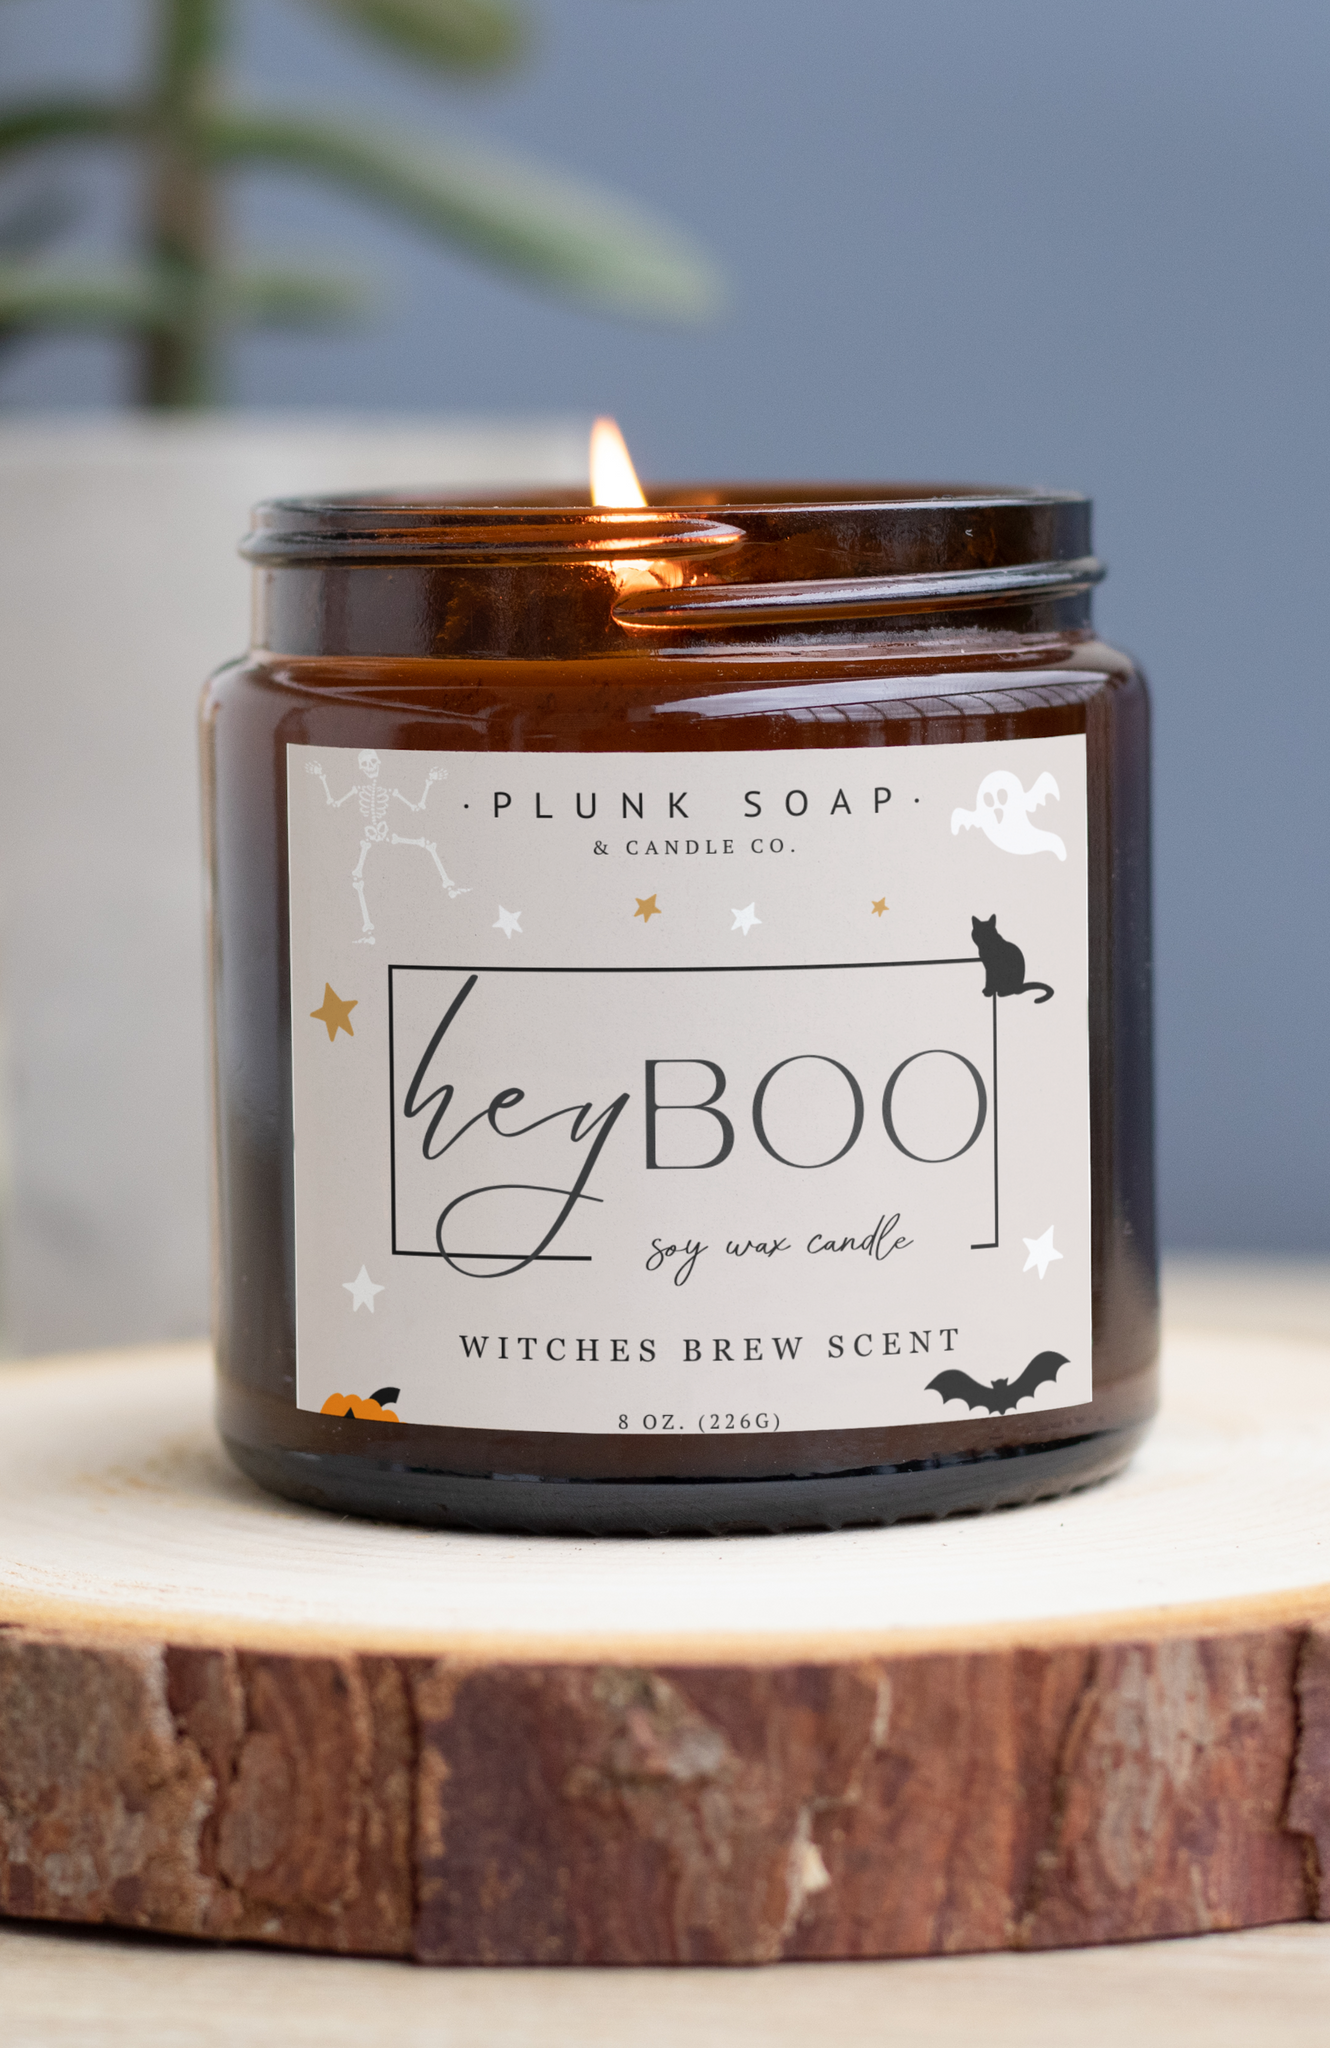 Hey Boo Scented Soy Candle